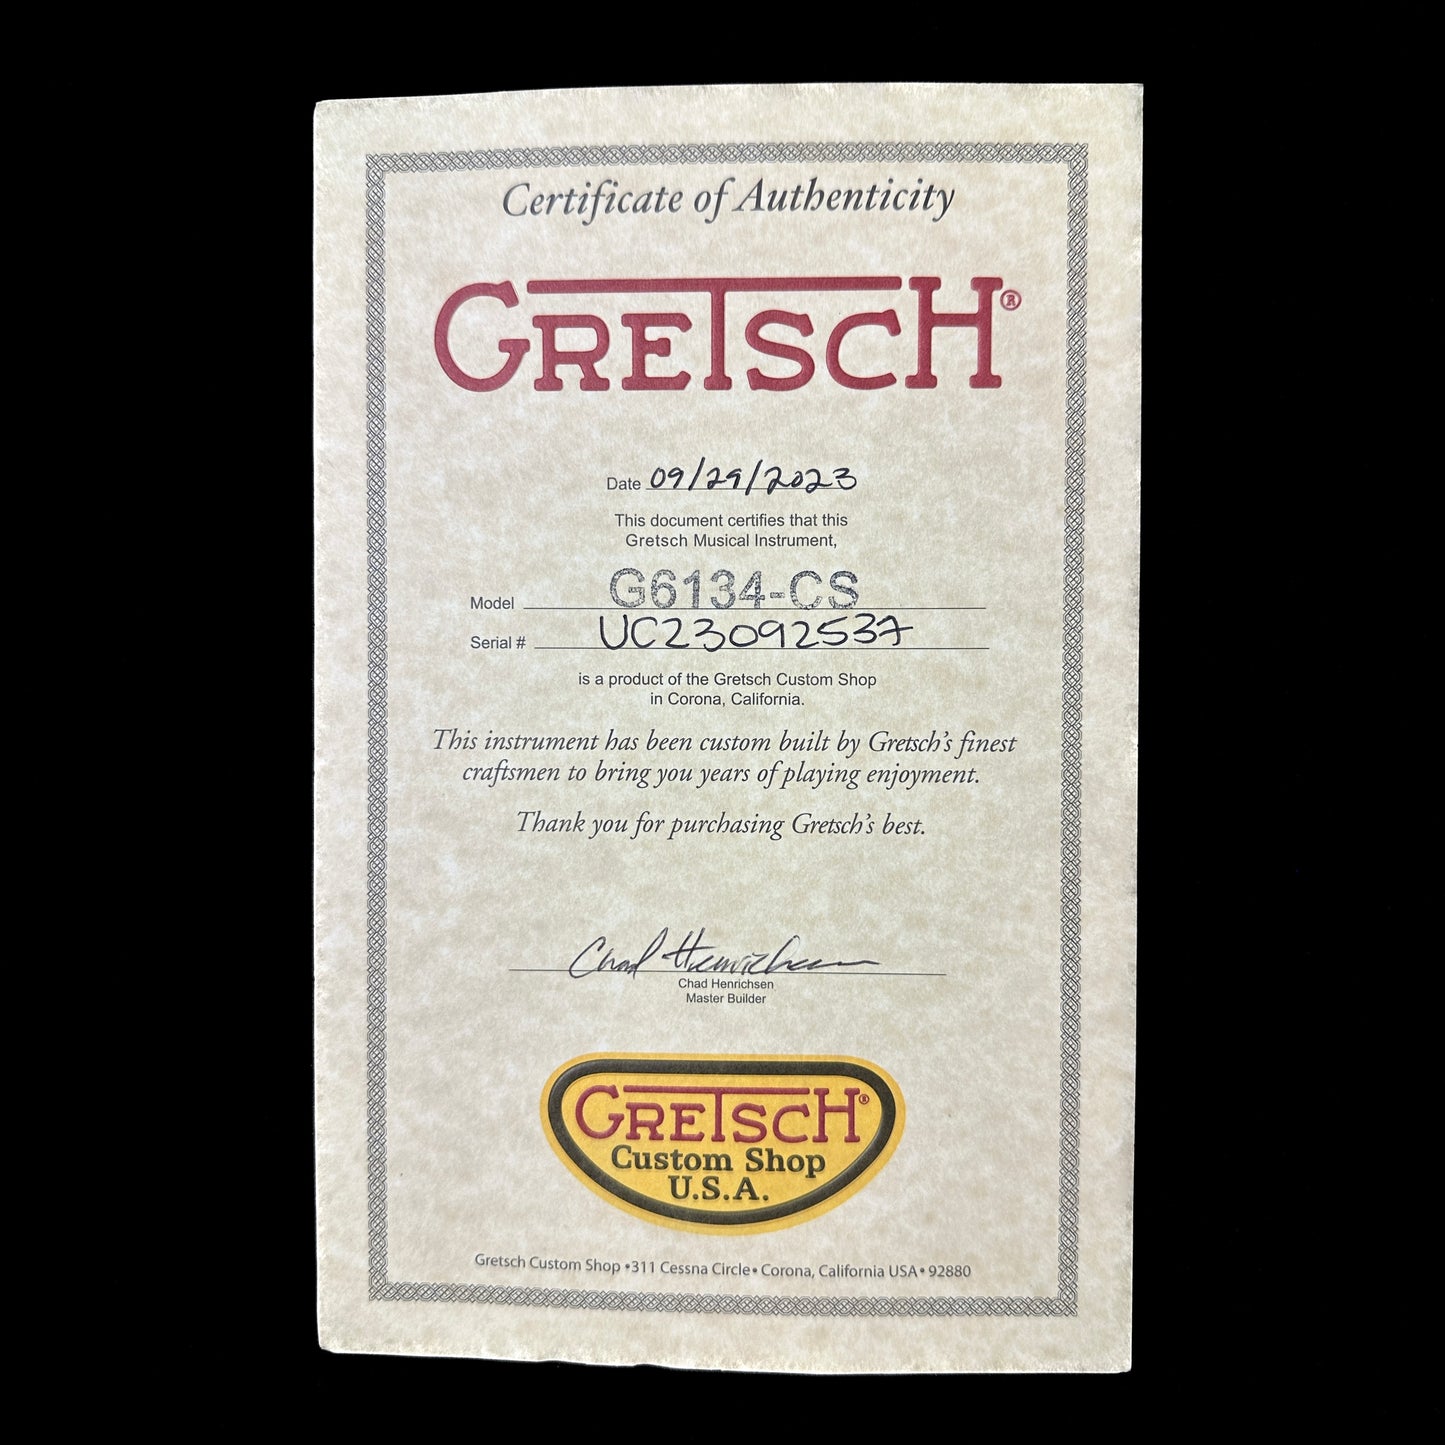 Certificate of authenticity for Gretsch Custom Shop G6134-59 Penguin Relic Daphne Blue.